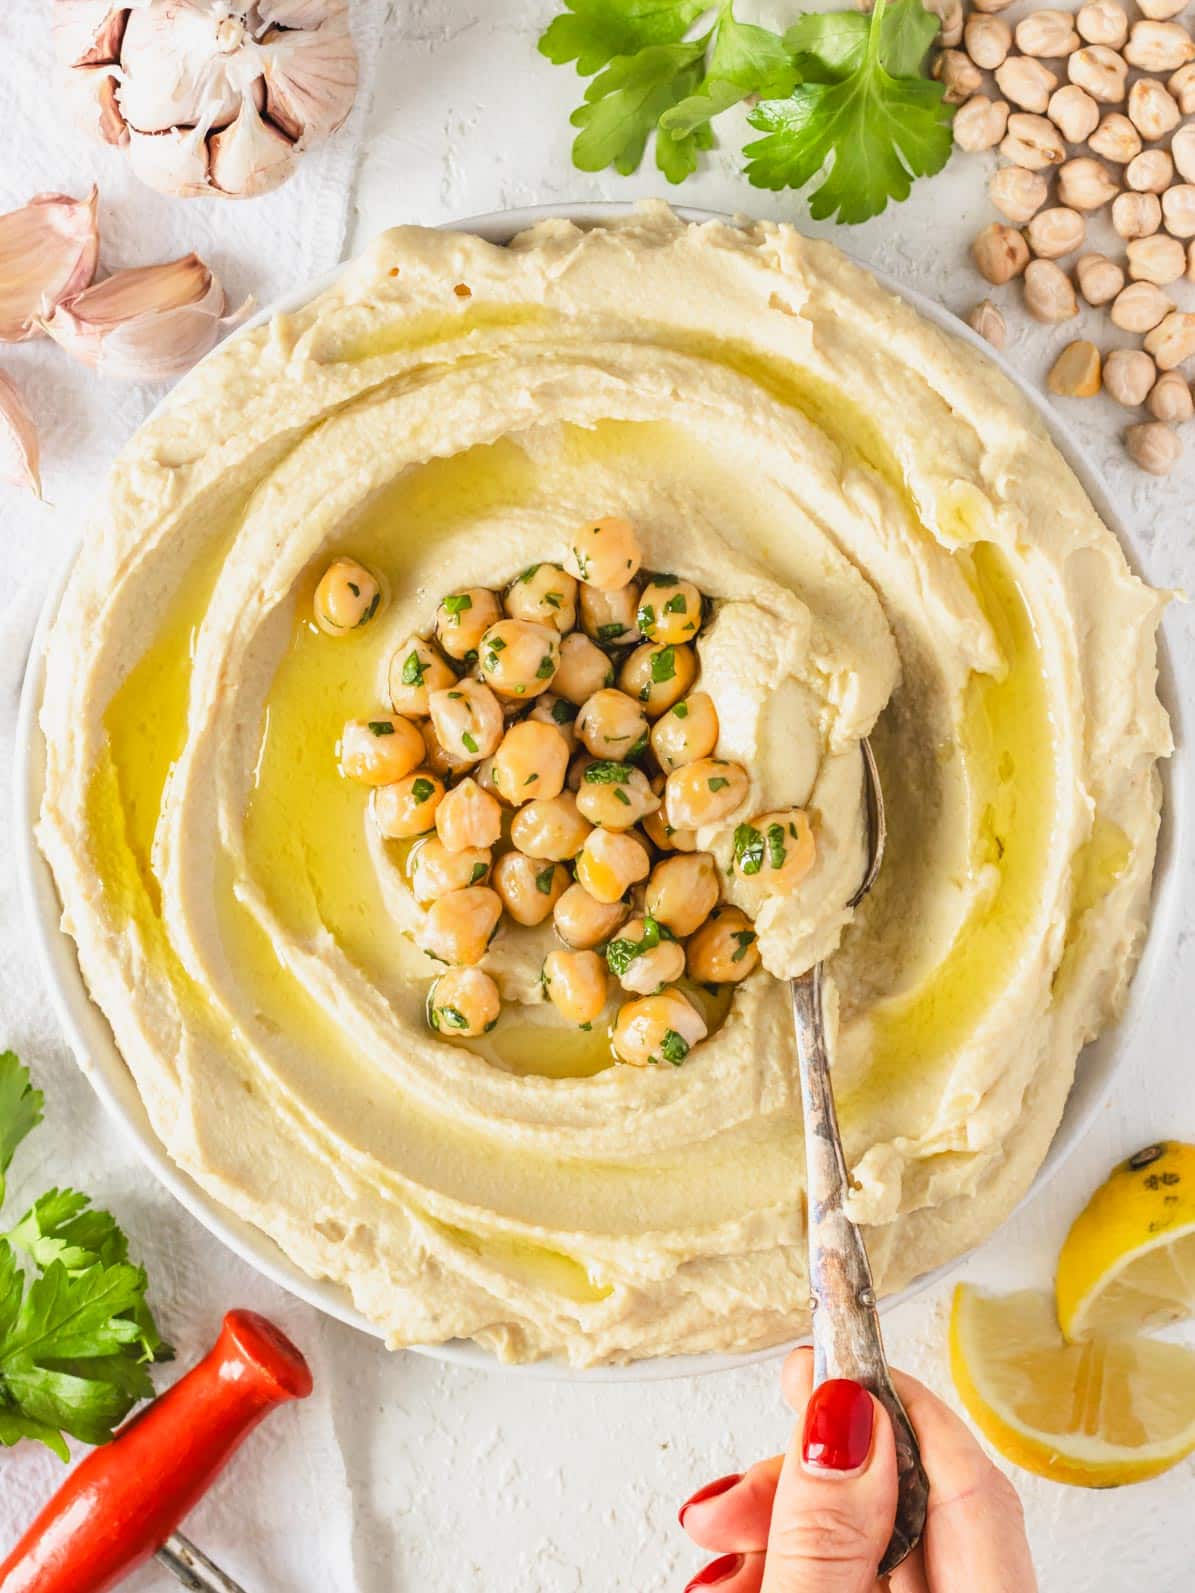 Hummus on a plate with chickpeas in the middle and a hand holding a spoon